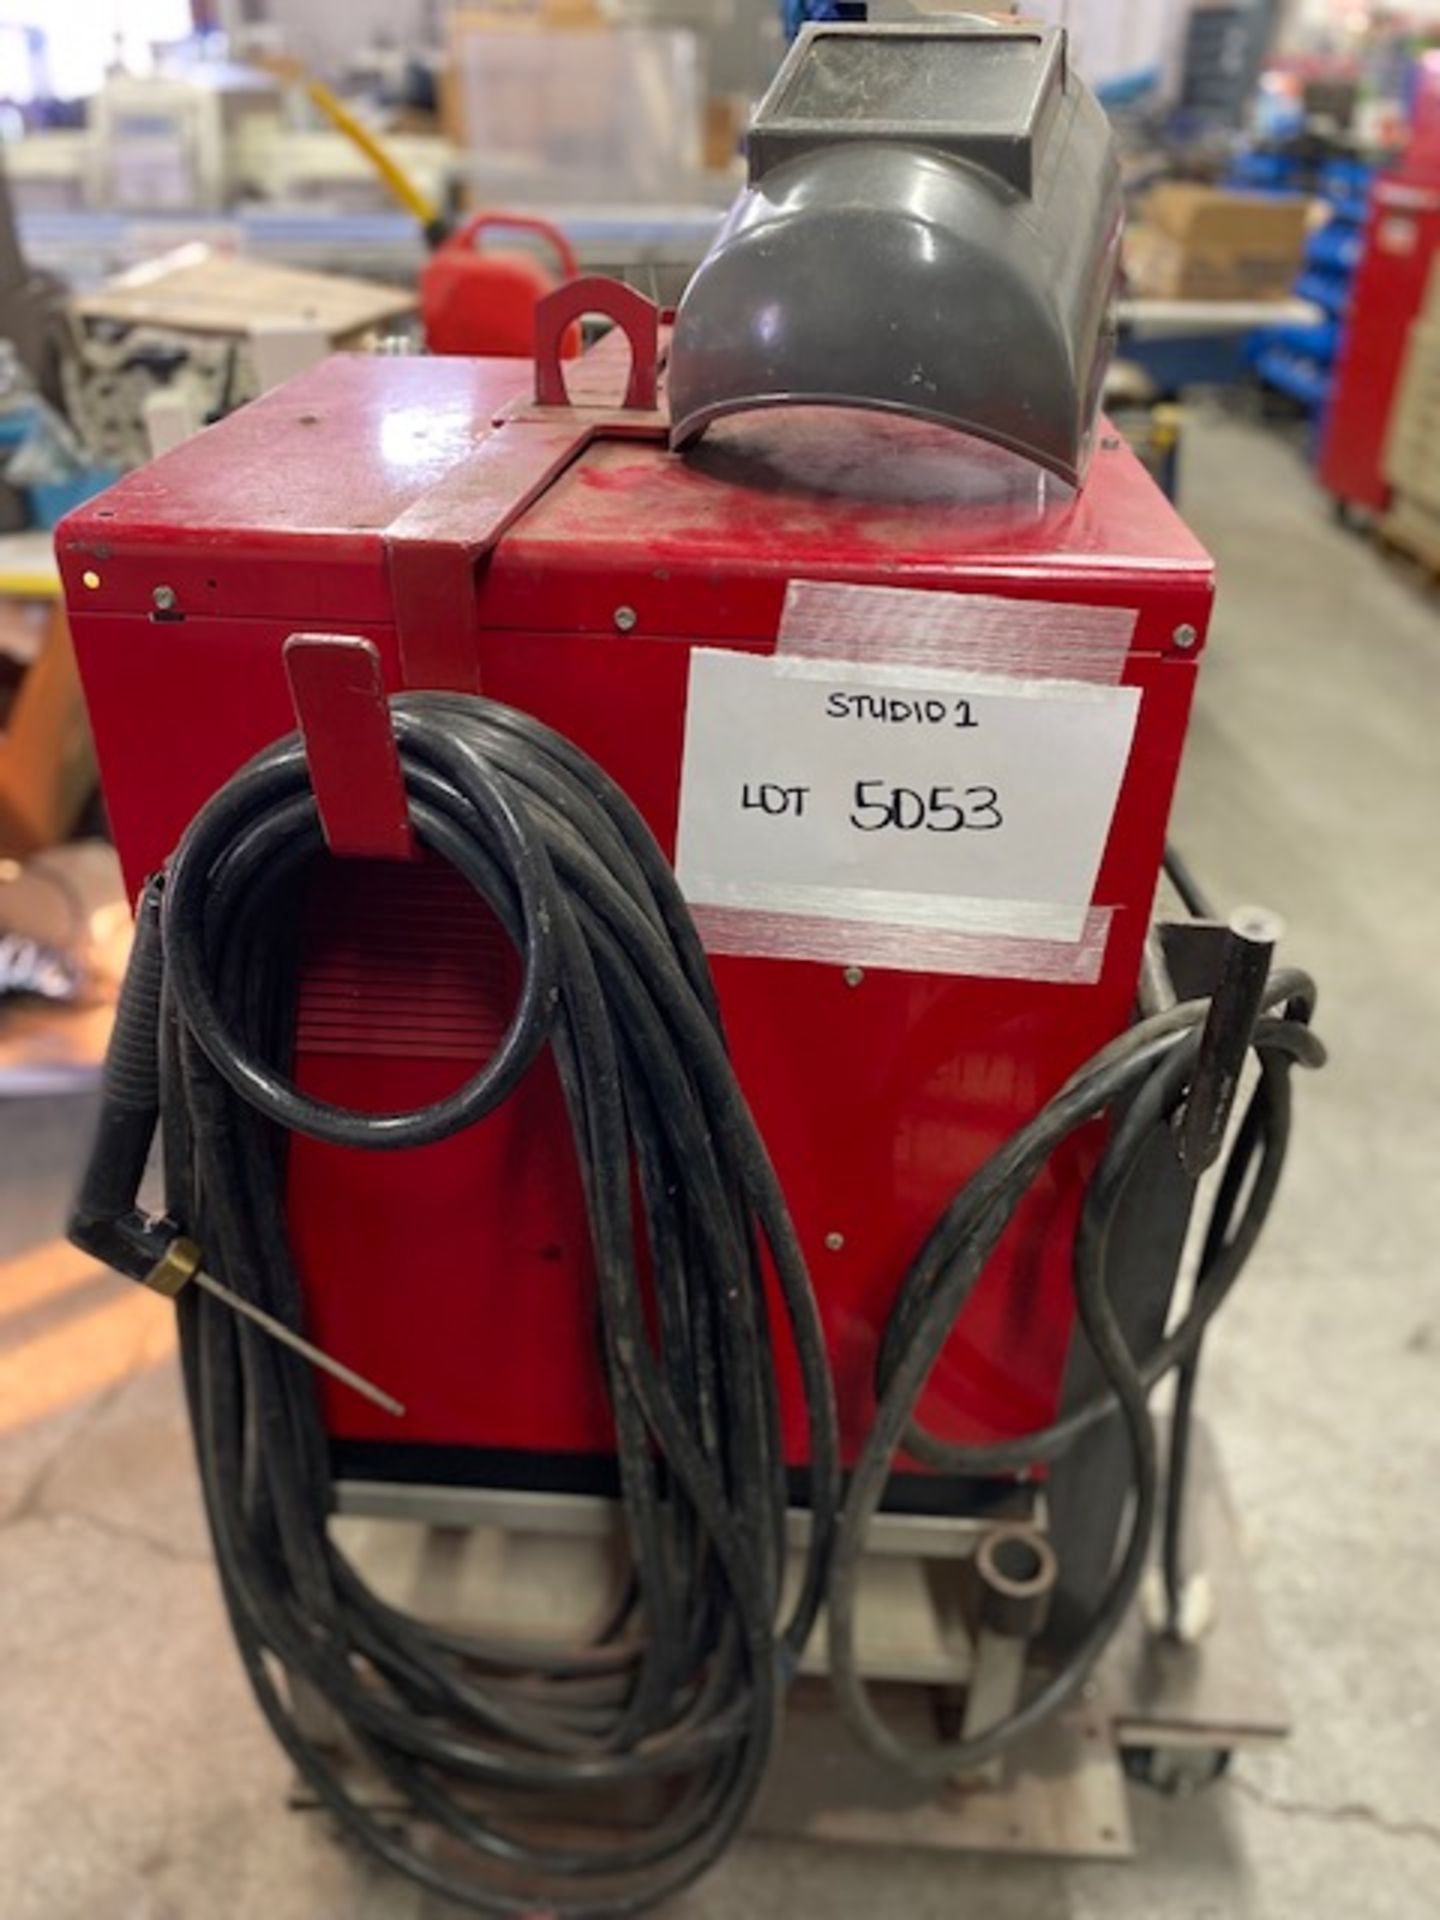 STICK WELDER, LINCOLN ELECTRIC, IDEALARC 250, 40 AMPS, 250V WITH METAL FACE SHIELD - Image 4 of 4